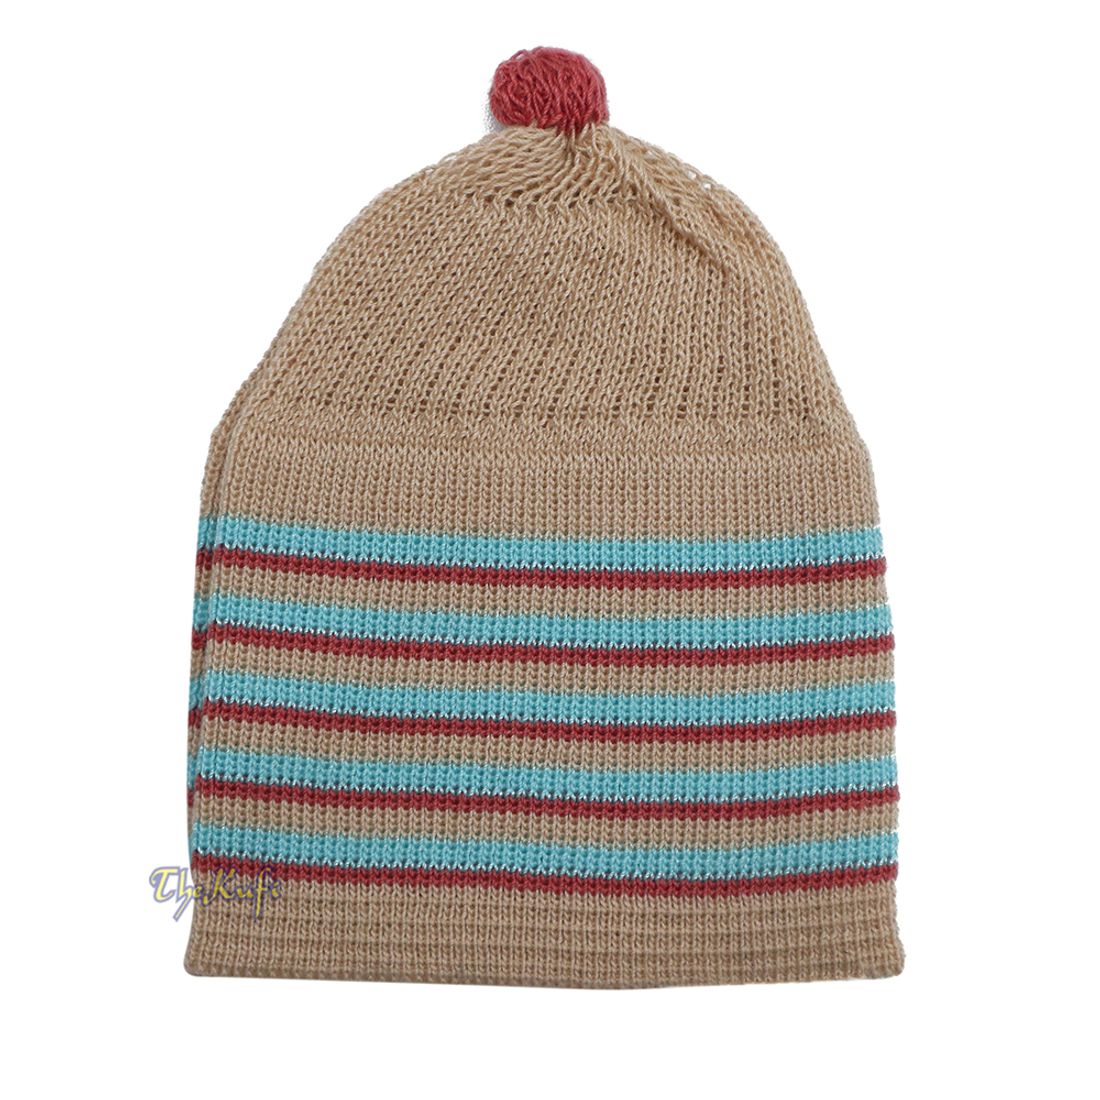 Beige with Turquoise and Maroon Lines Baby or Infant Kufi Pompom Stretchable Beanie